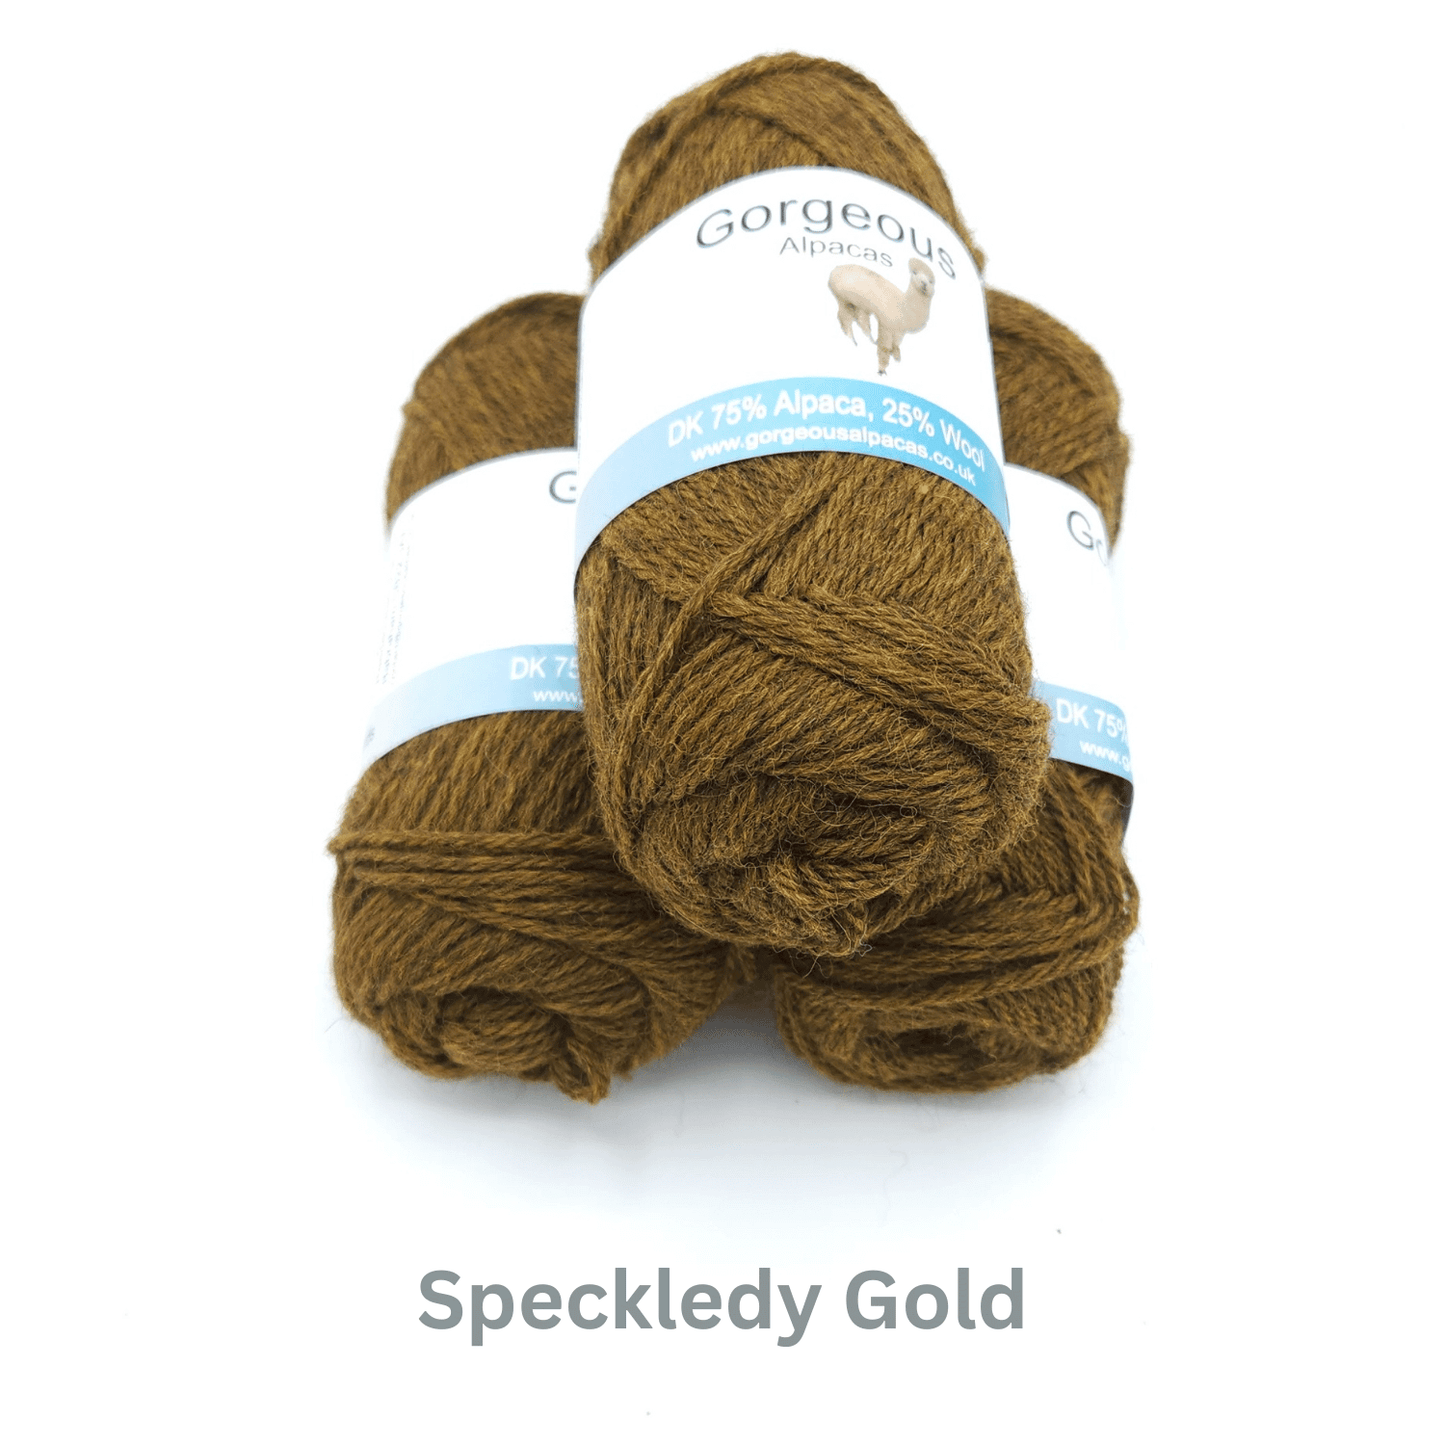 DK alpaca wool from British and Irish farms shown here in Speckledy Gold